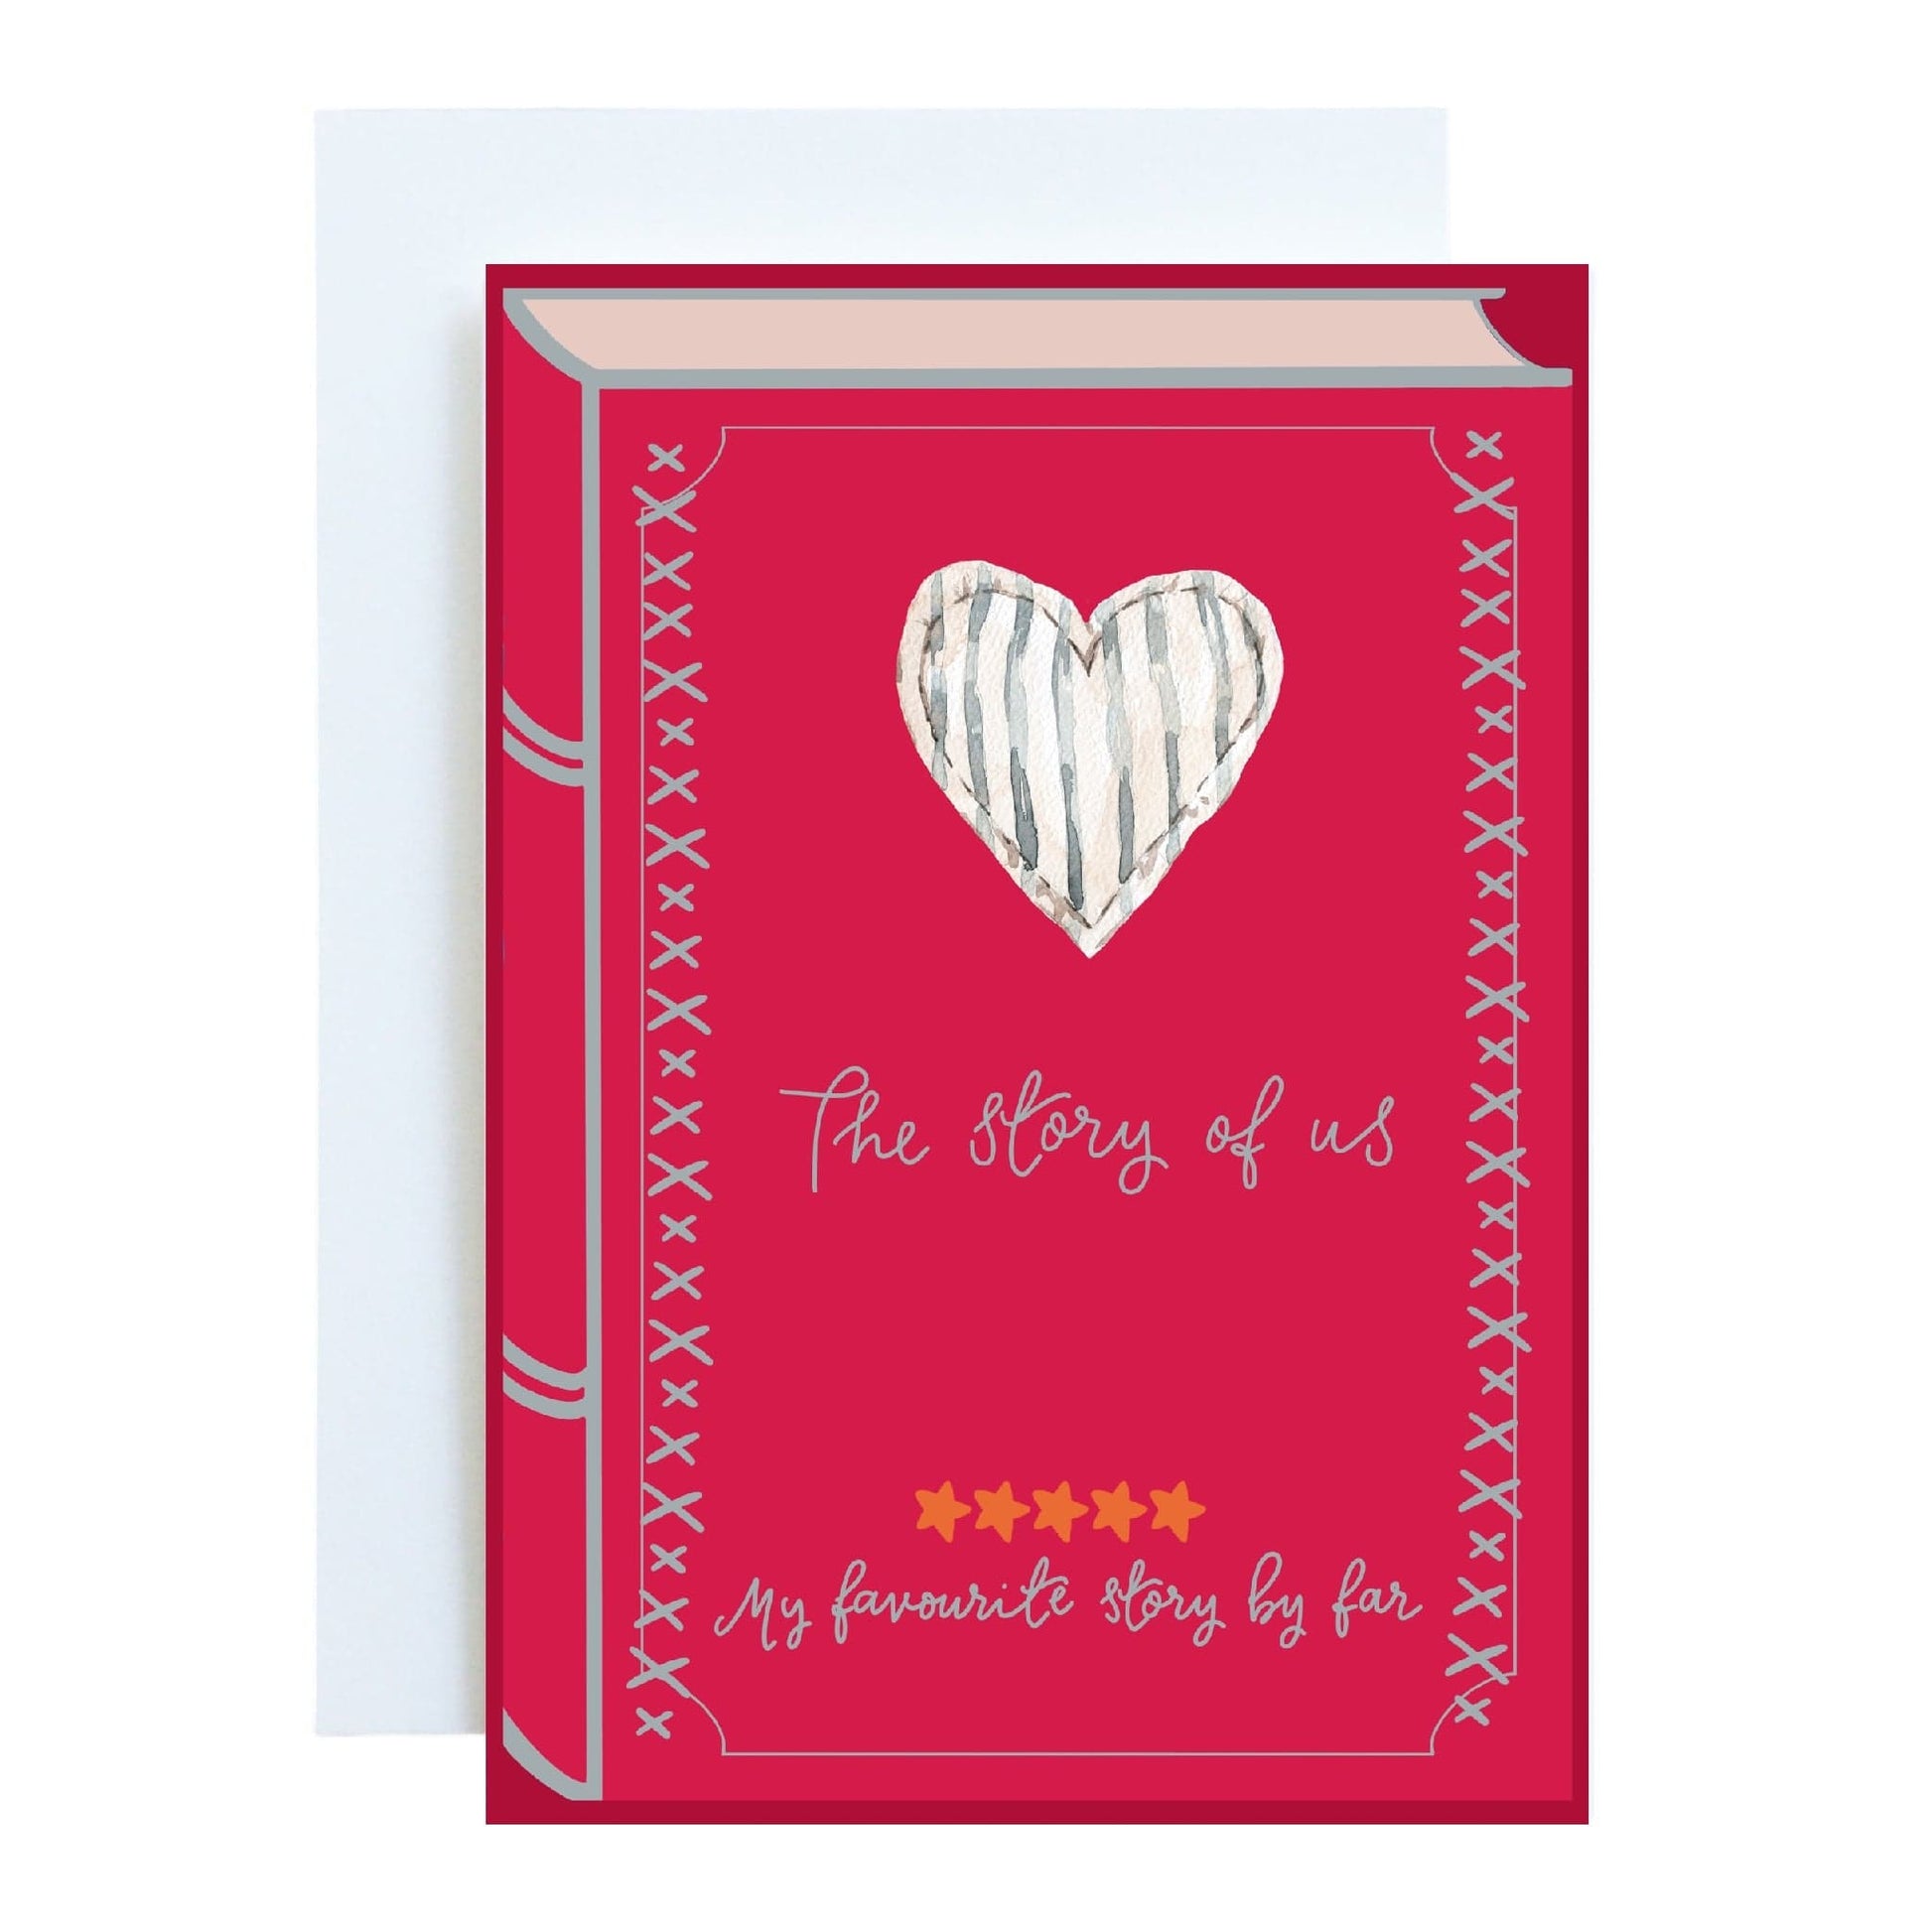 Book romantic card - The story of us - hot pink Cards And Hope Designs   